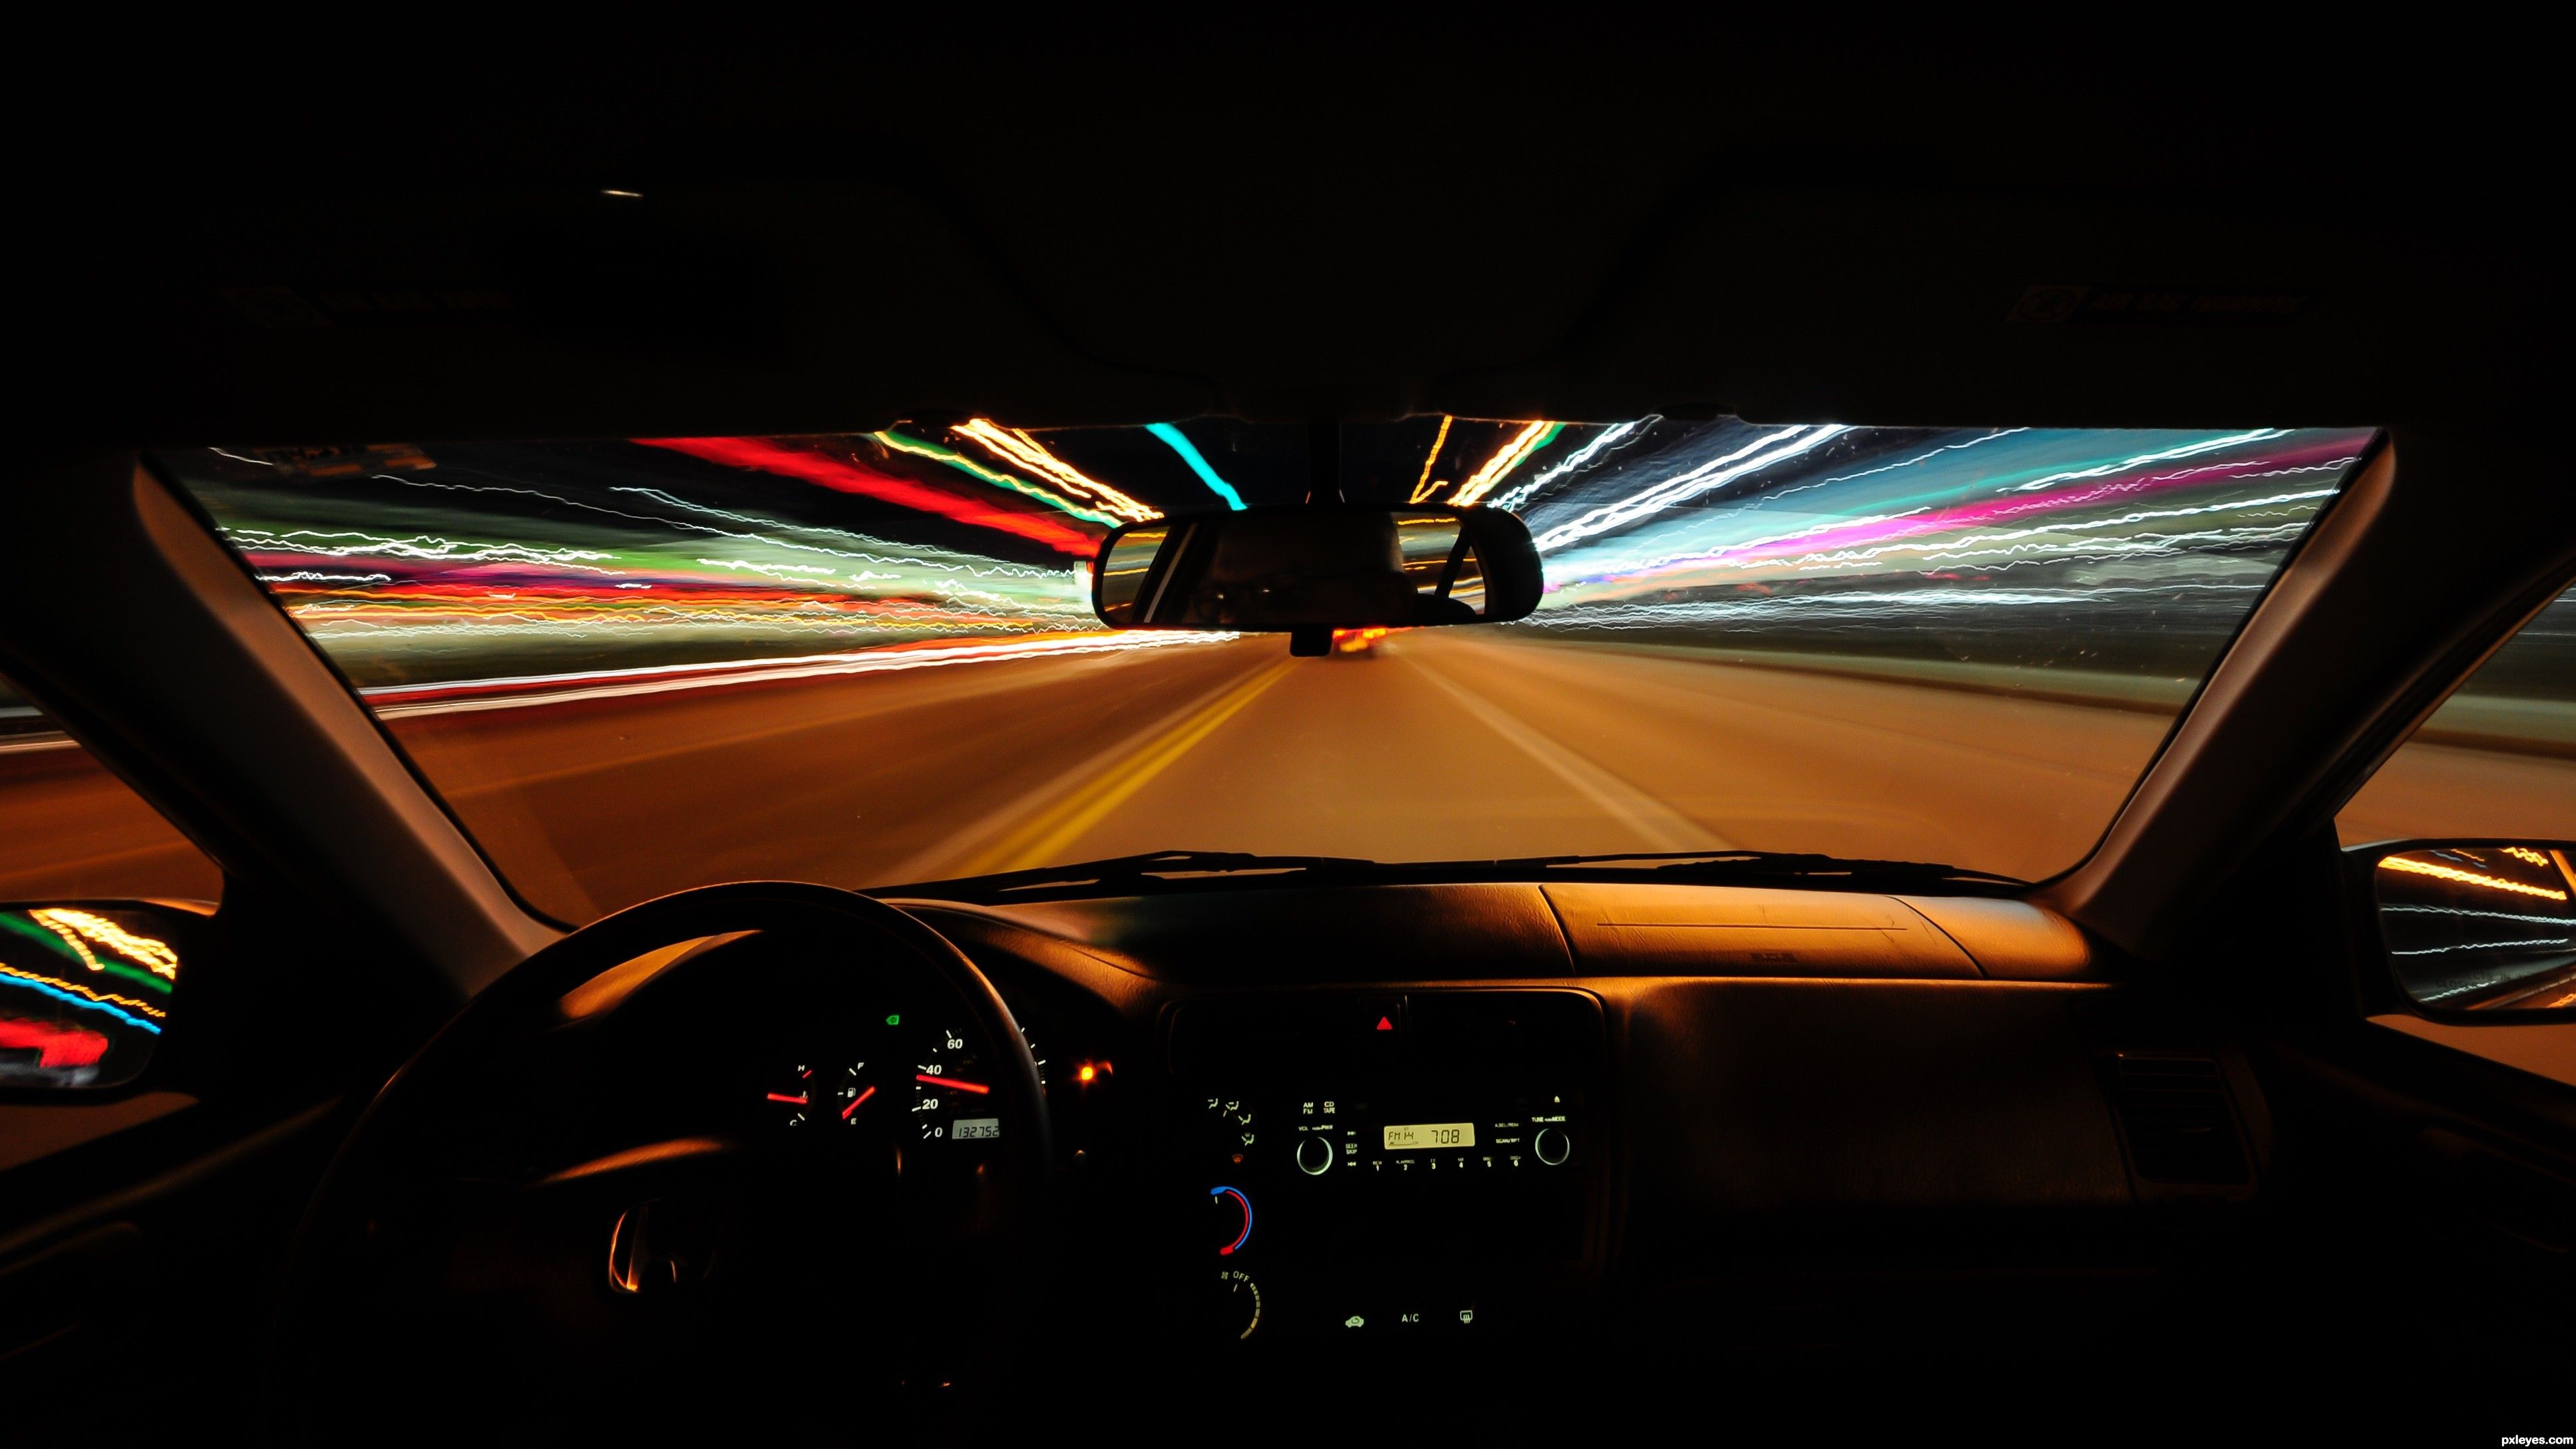 night drive picture, by bjschneider for: long exposure night photography contest